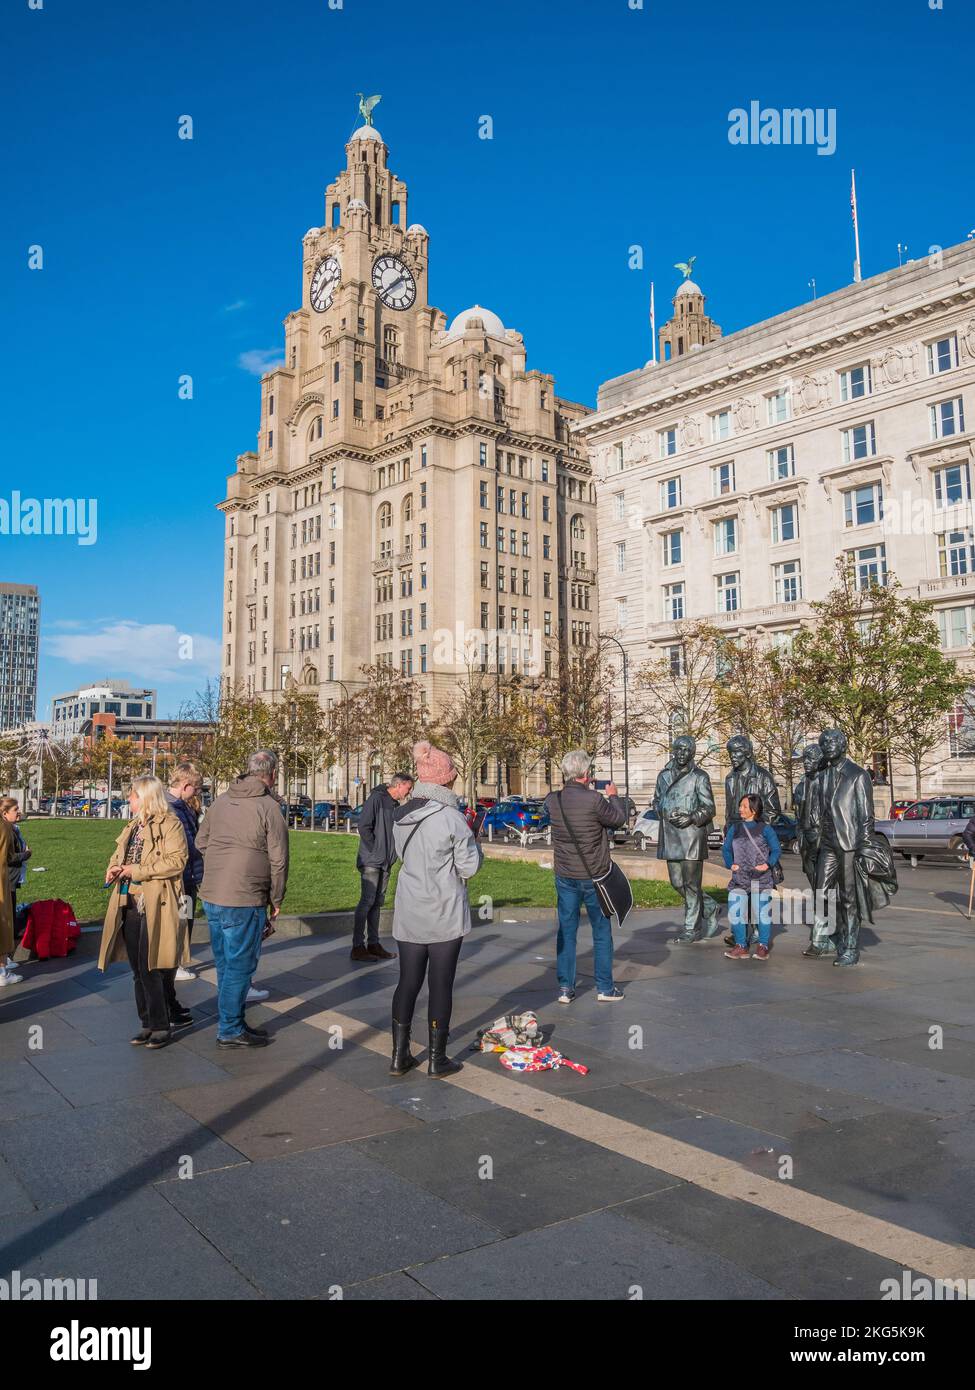 Street scene in Liverpool with tourists queueing to have selfies with the statues of the famous Beatles pop group, along with the Liver Building Stock Photo